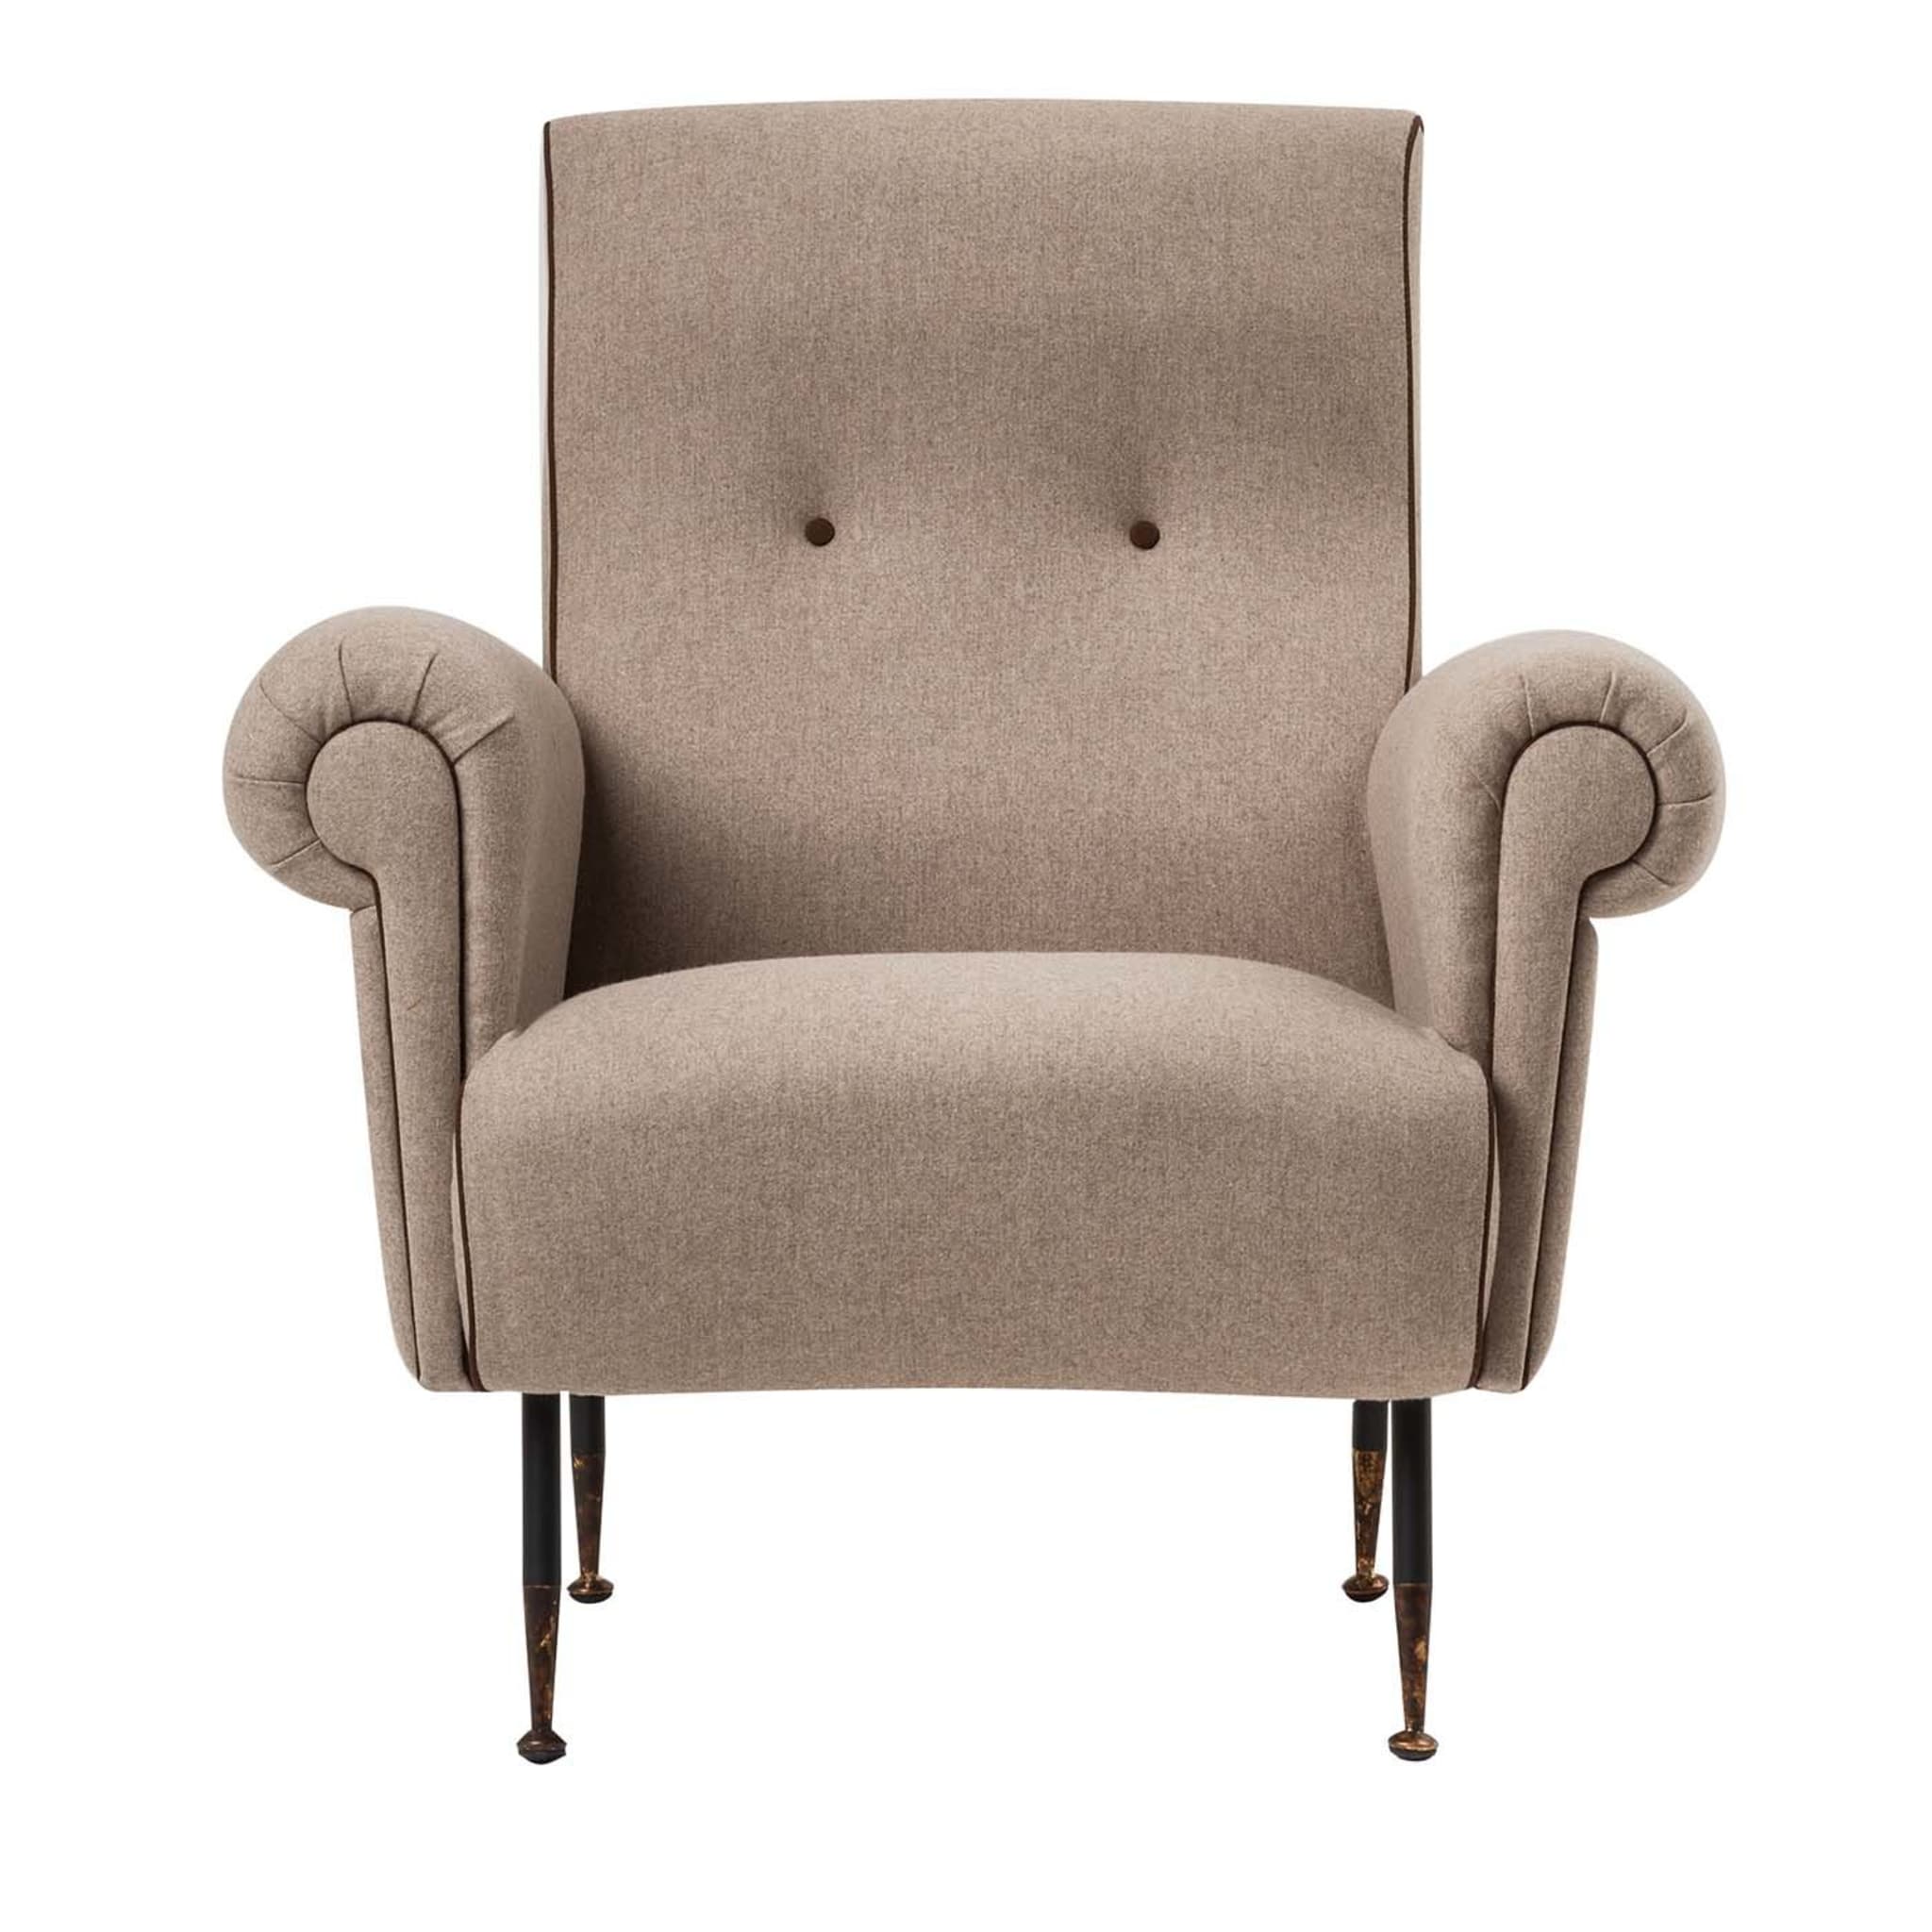 Pulce Armchair Tribeca Collection by Marco and Giulio Mantellassi - Main view